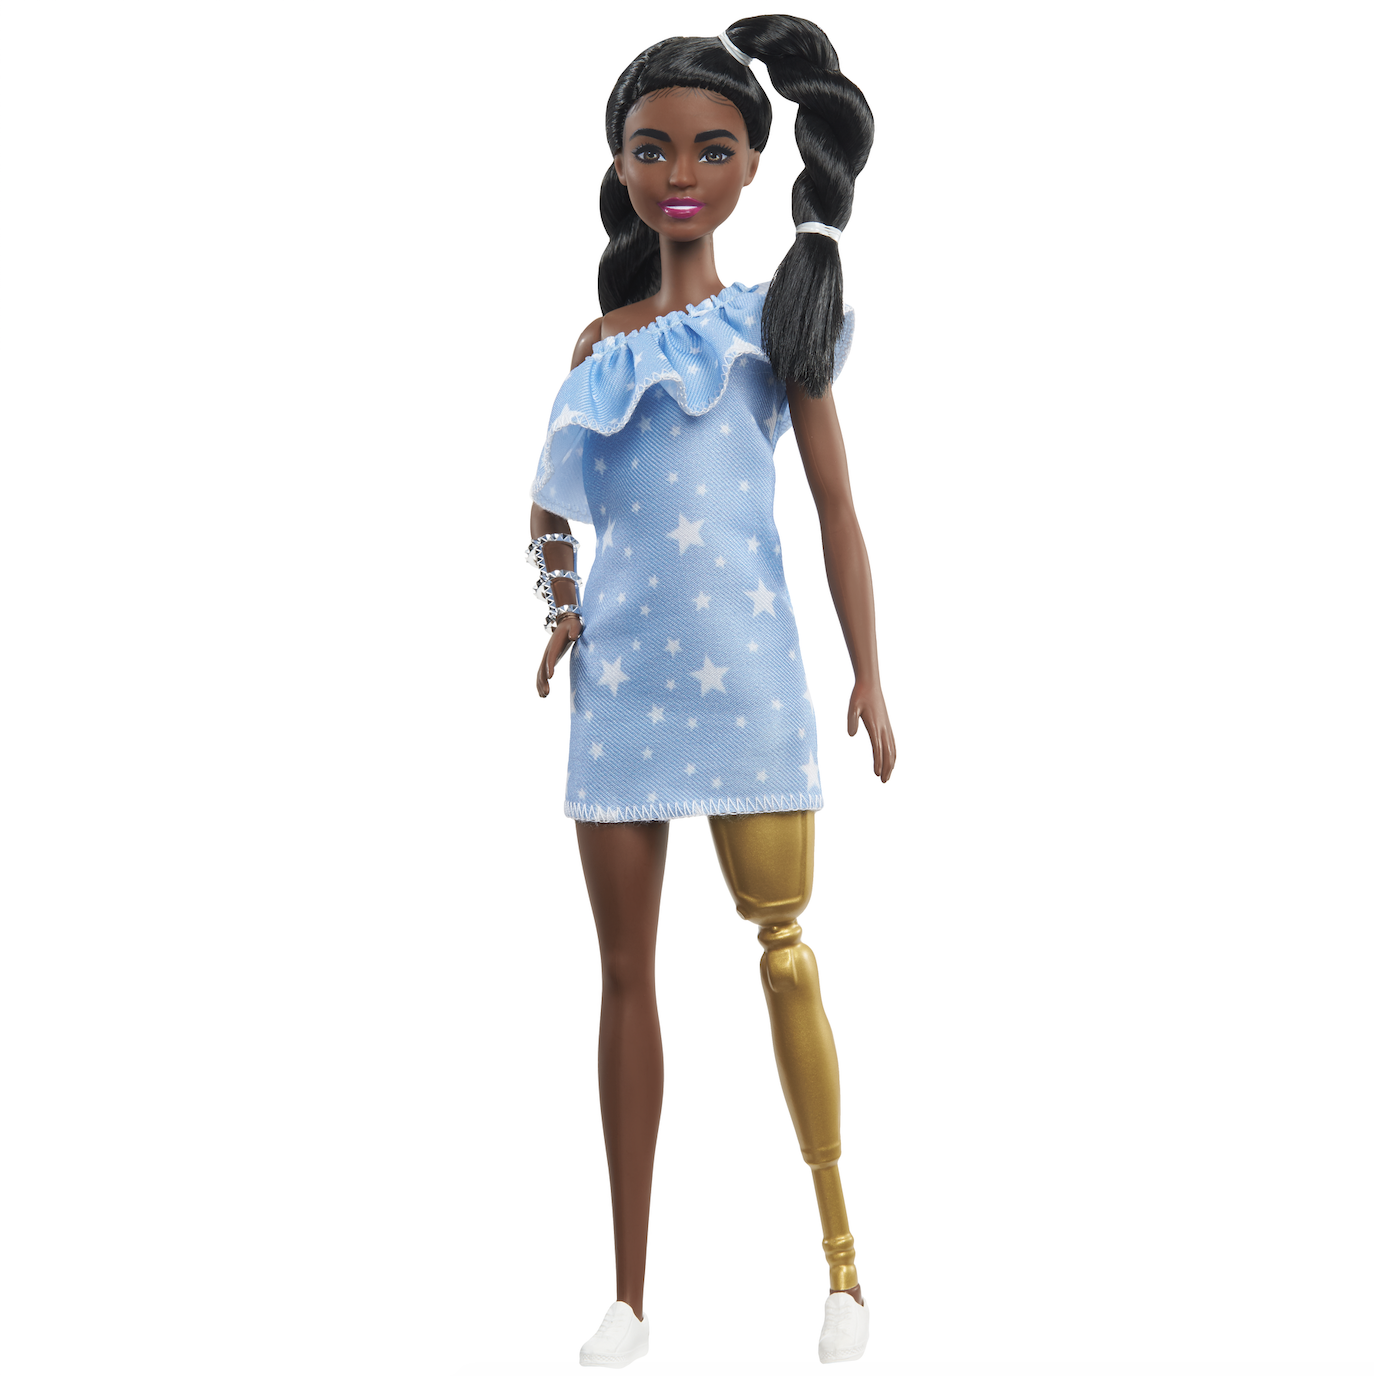 barbie doll with prosthetic leg